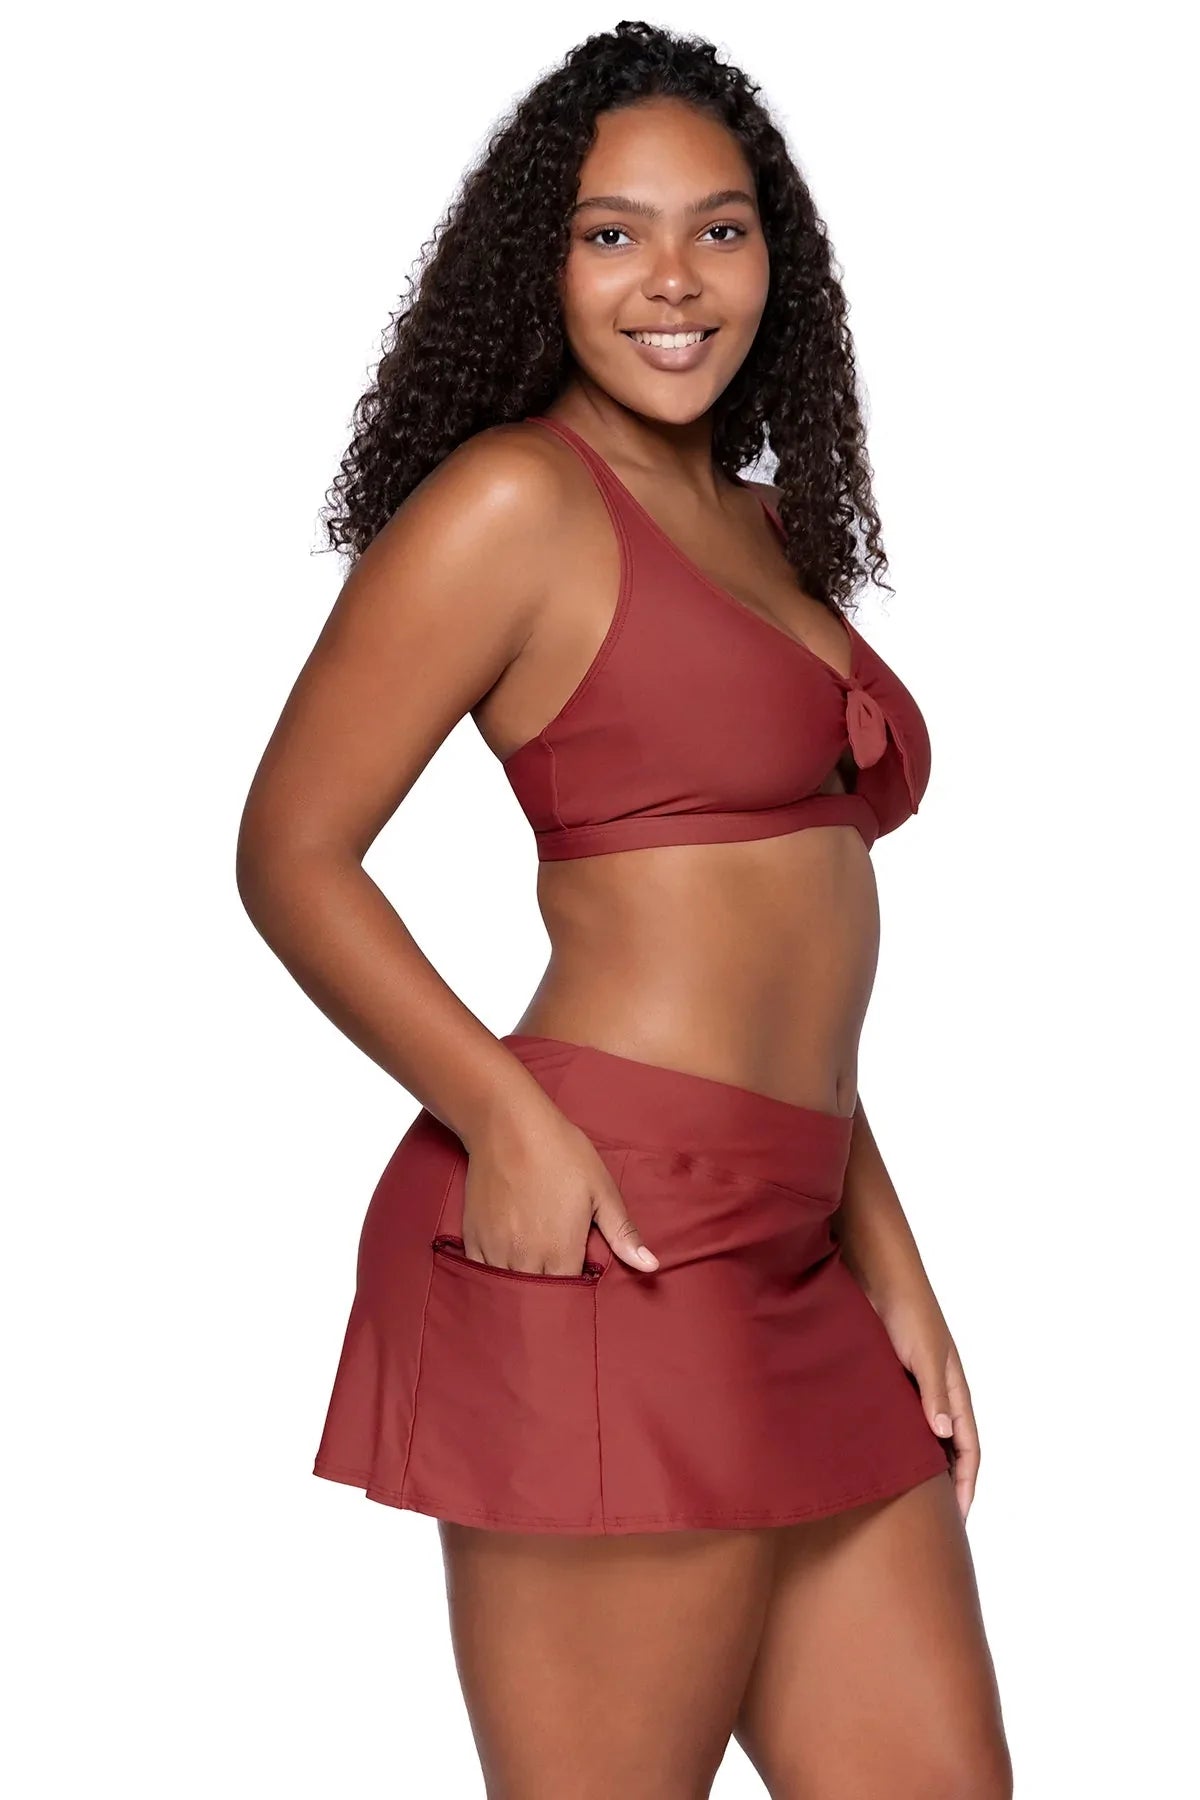 Sunsets Escape "Brands,Swimwear" Sunsets Tuscan Red Sporty Swim Skirt